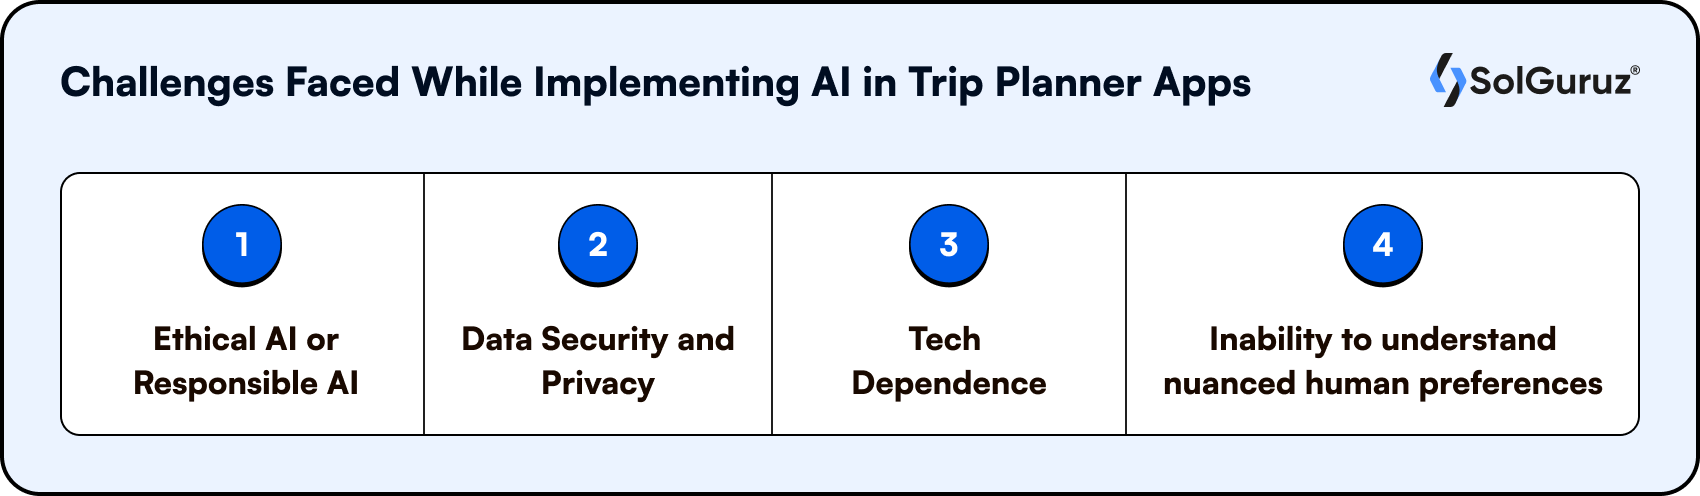 Challenges Faced While Implementing AI in Trip Planner Apps